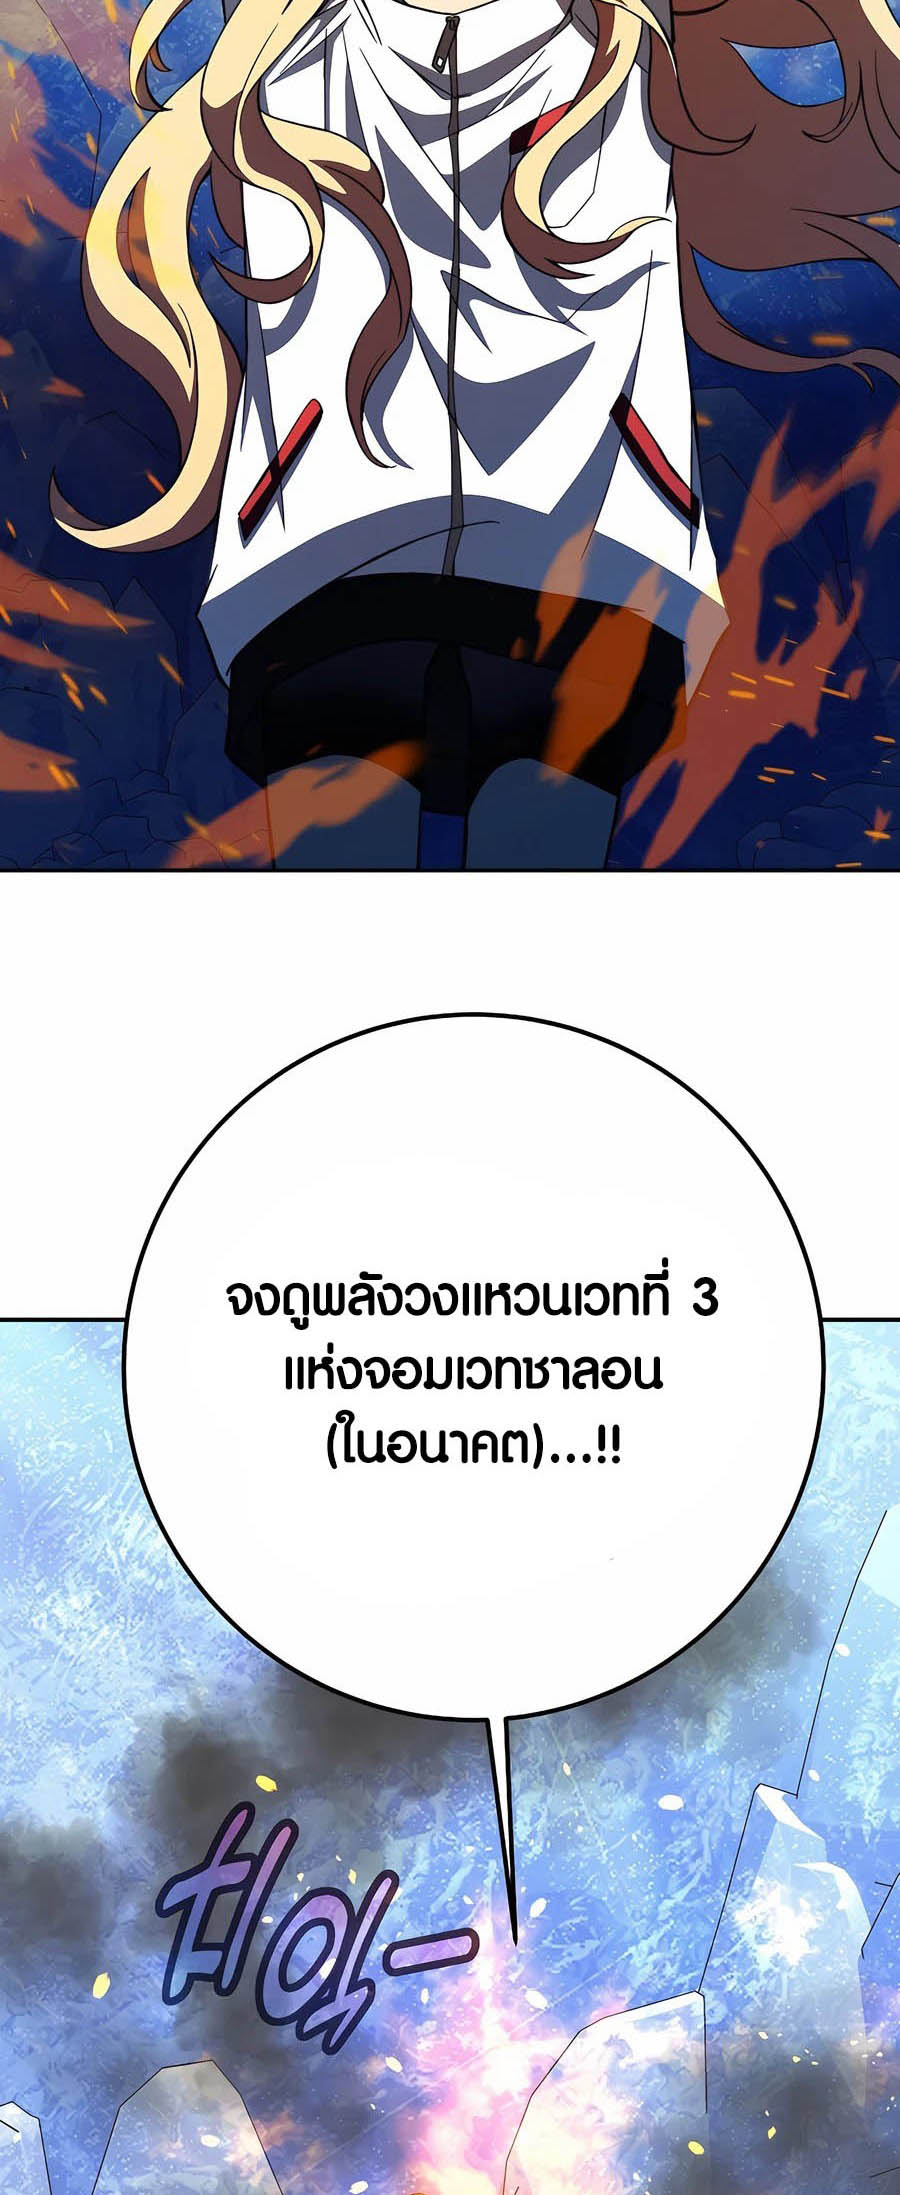 à¸­à¹ˆà¸²à¸™à¸¡à¸±à¸™à¸®à¸§à¸² à¹€à¸£à¸·à¹ˆà¸­à¸‡ The Part Time Land of the Gods 57 49